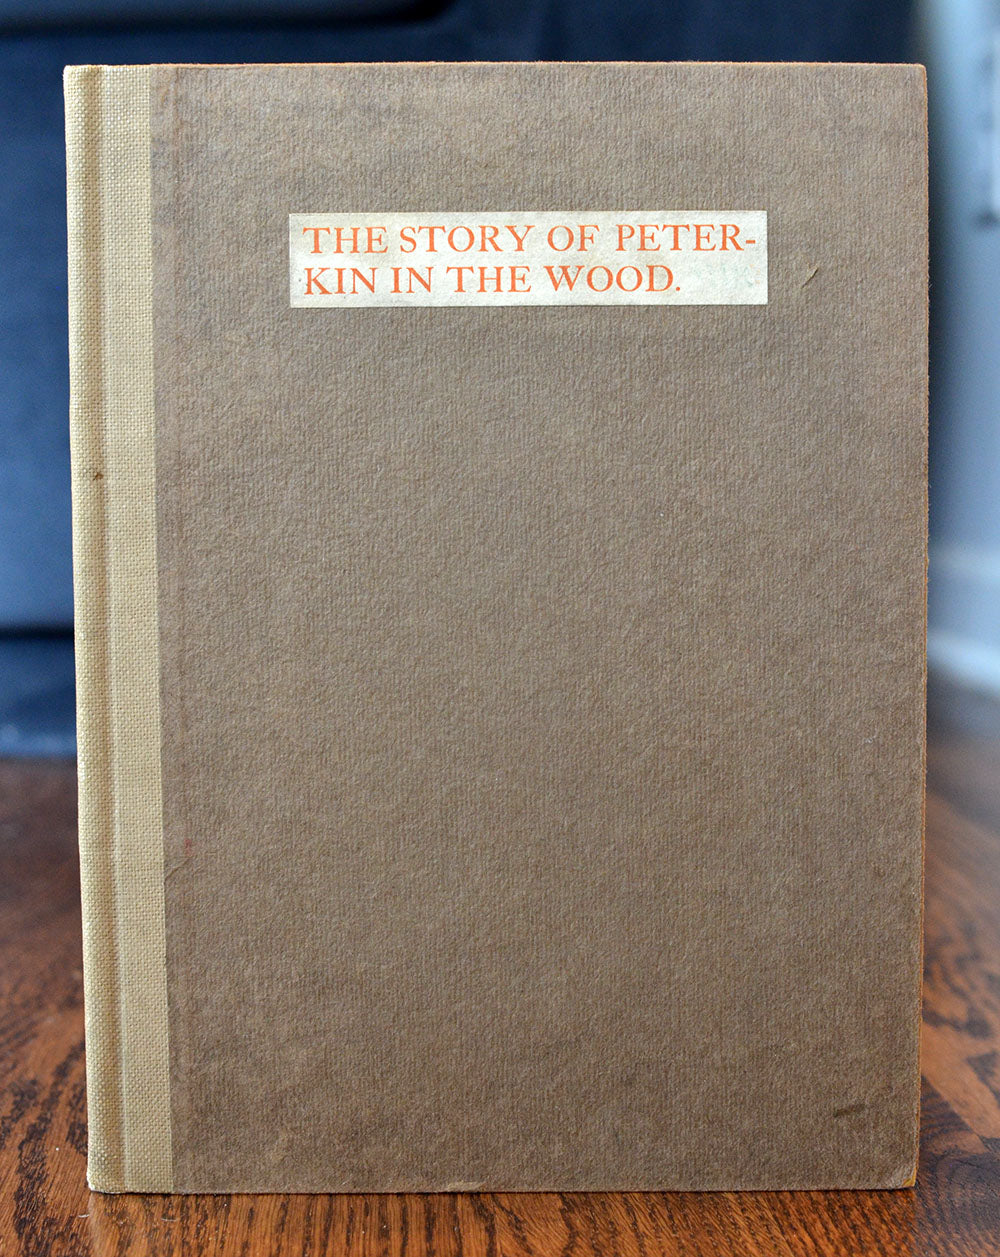 [Stonebridge Press | Limited to 50 Copies] The Story of Peterkin in the Wood